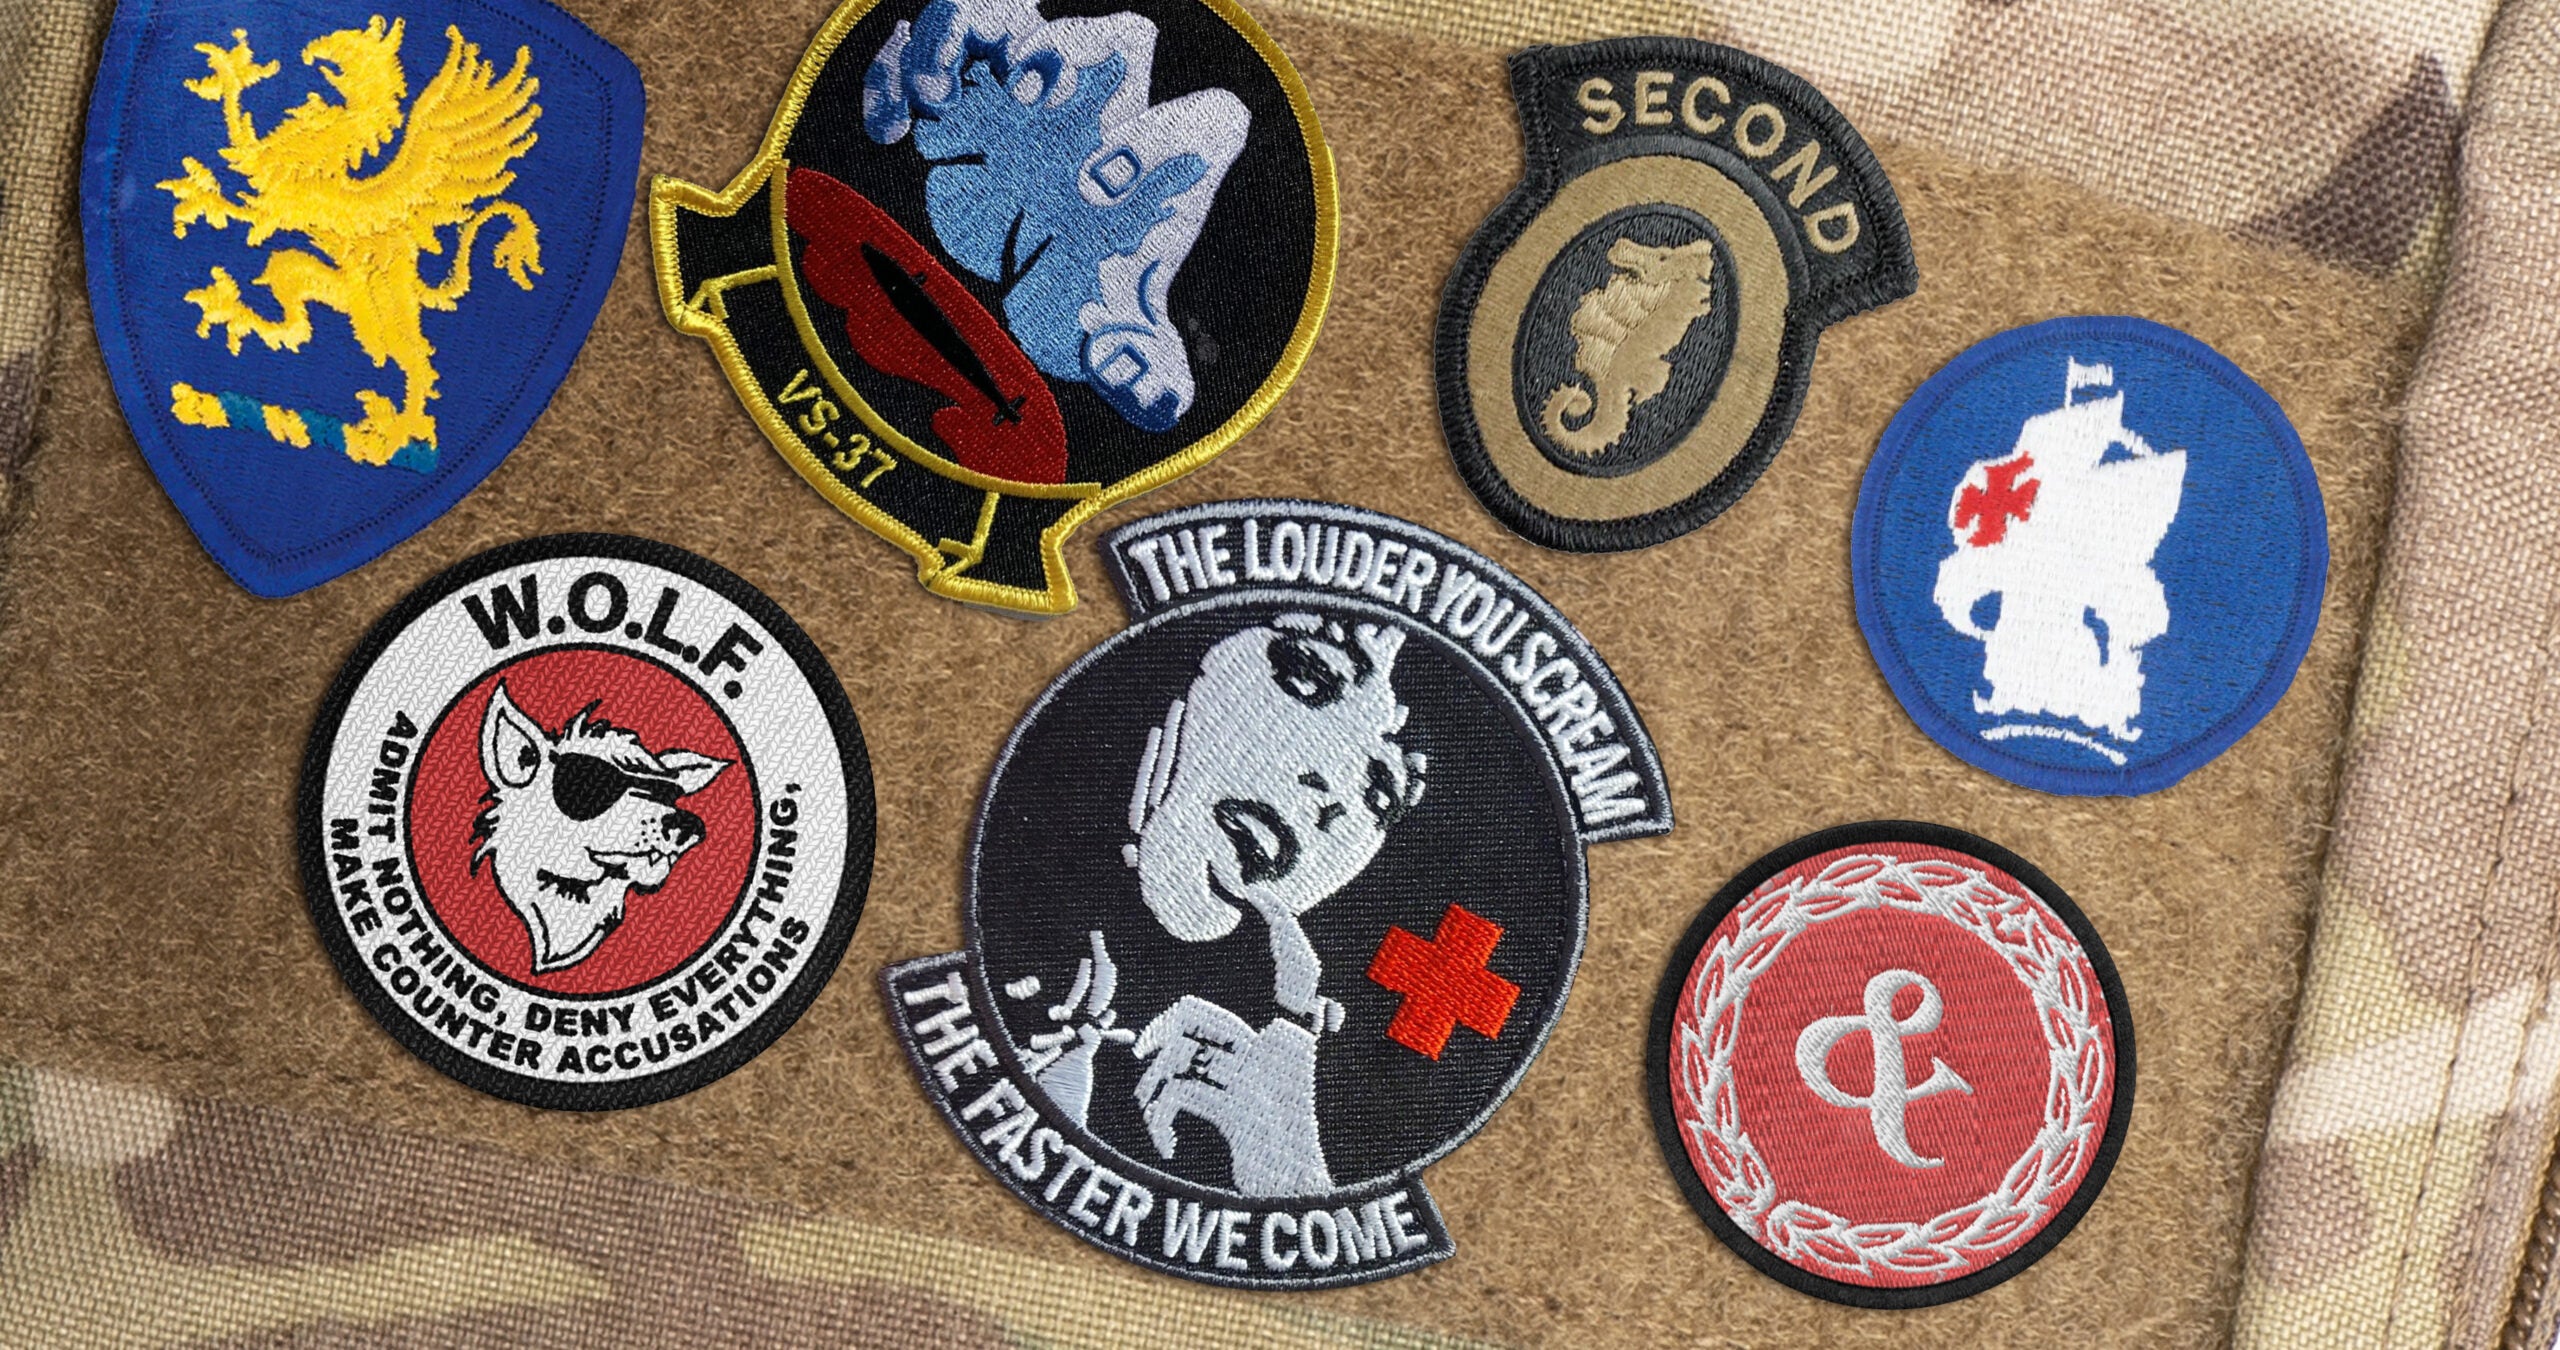 These Amazing Patches Reveal the Most Secretive Units of the US Military